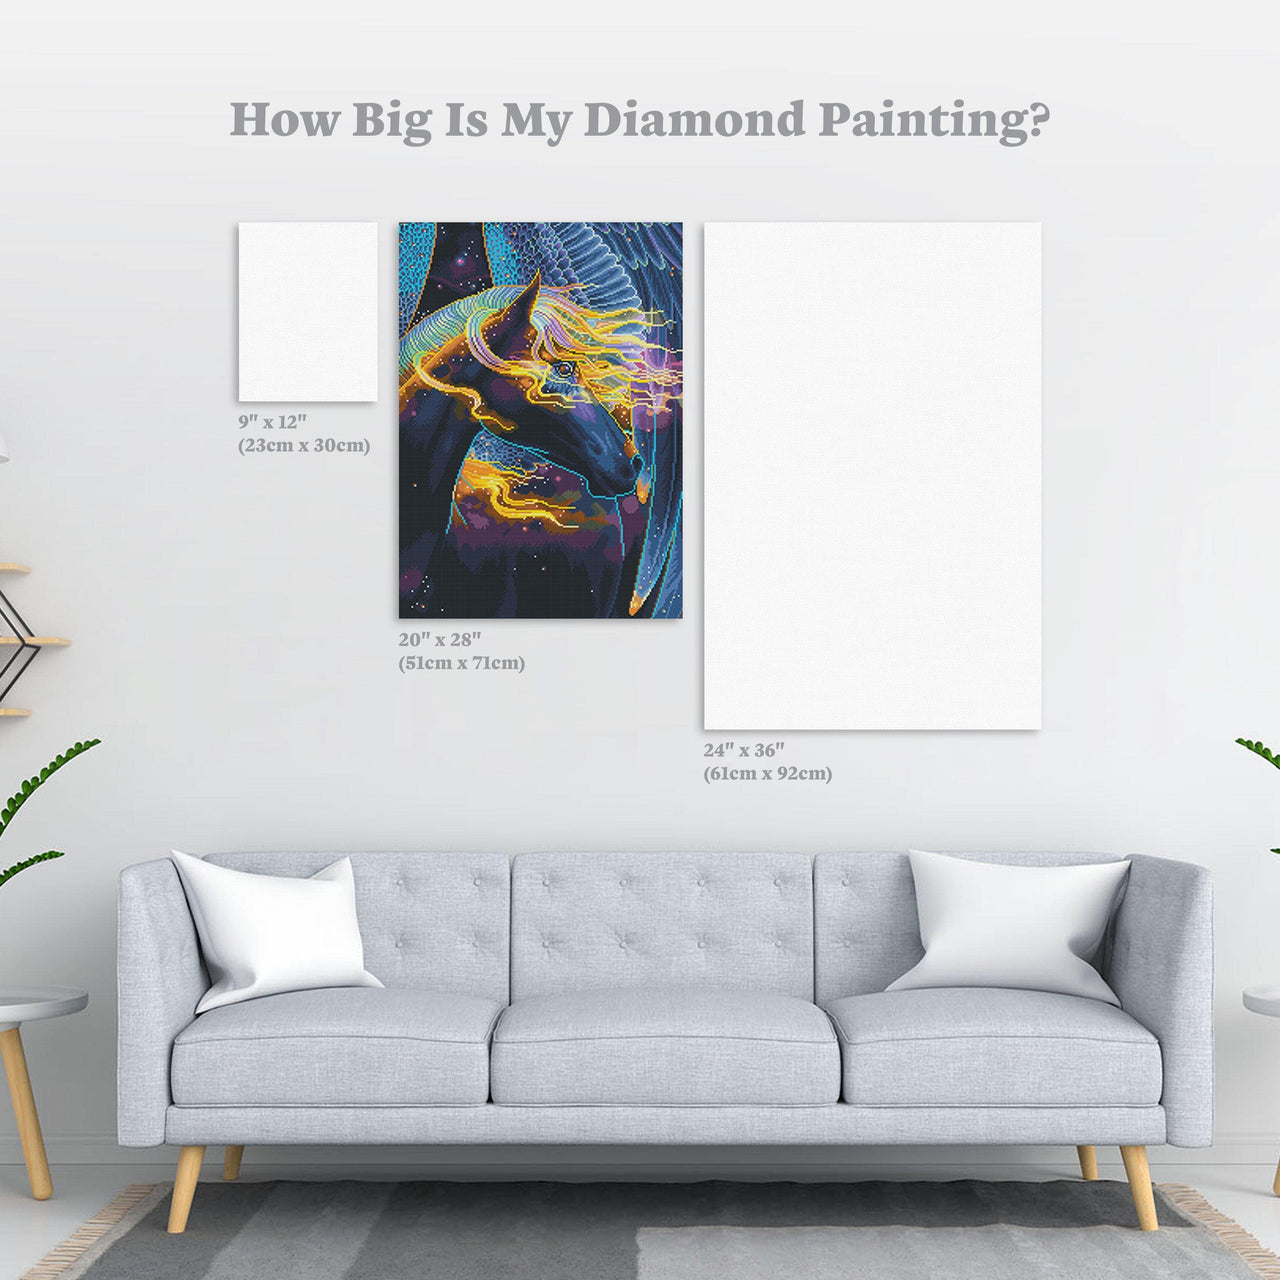 Diamond Painting Paint The Stars 20" x 28″ (51cm x 71cm) / Round with 45 Colors including 2 ABs / 45,358